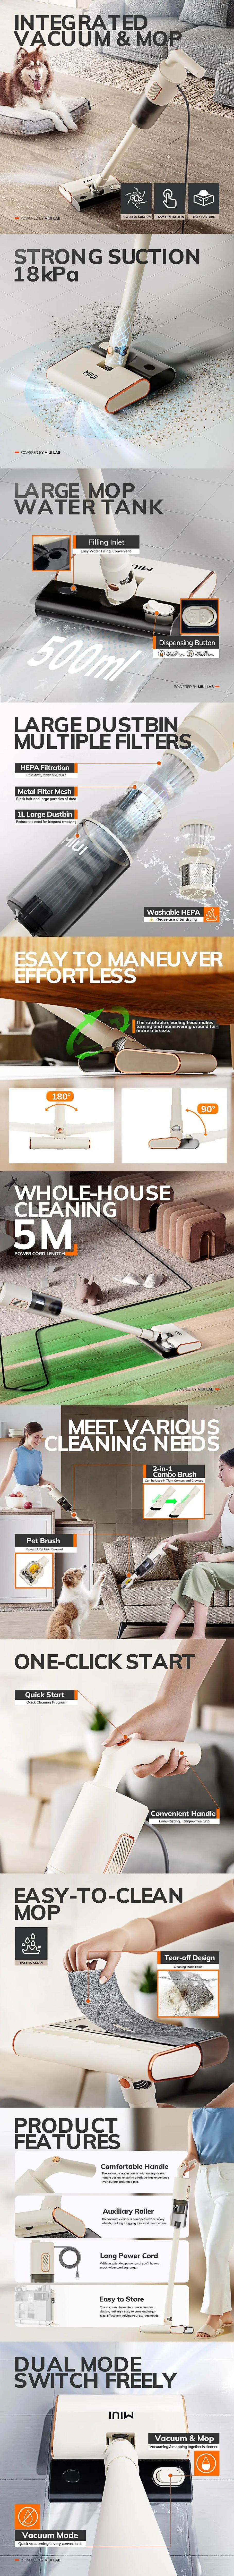 Showcasing Integratel's Multifunctional Vacuum Cleaner: a compact and powerful appliance ideal for modern European homes. Blends advanced functionality for optimal cleaning, easy use, and stylish minimalist design.